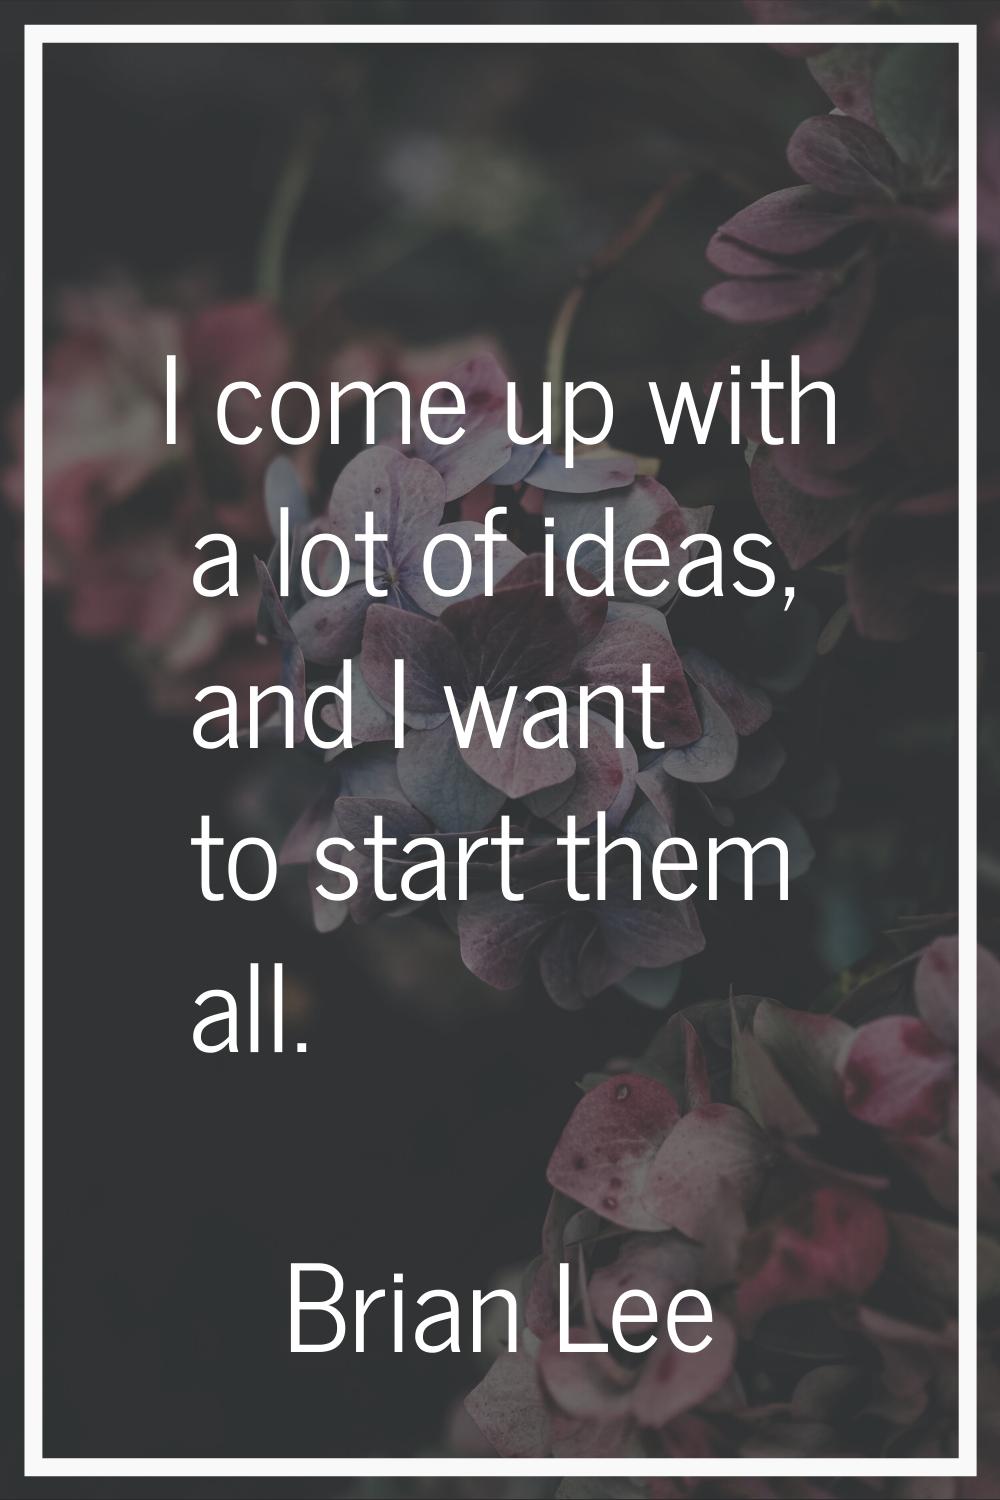 I come up with a lot of ideas, and I want to start them all.